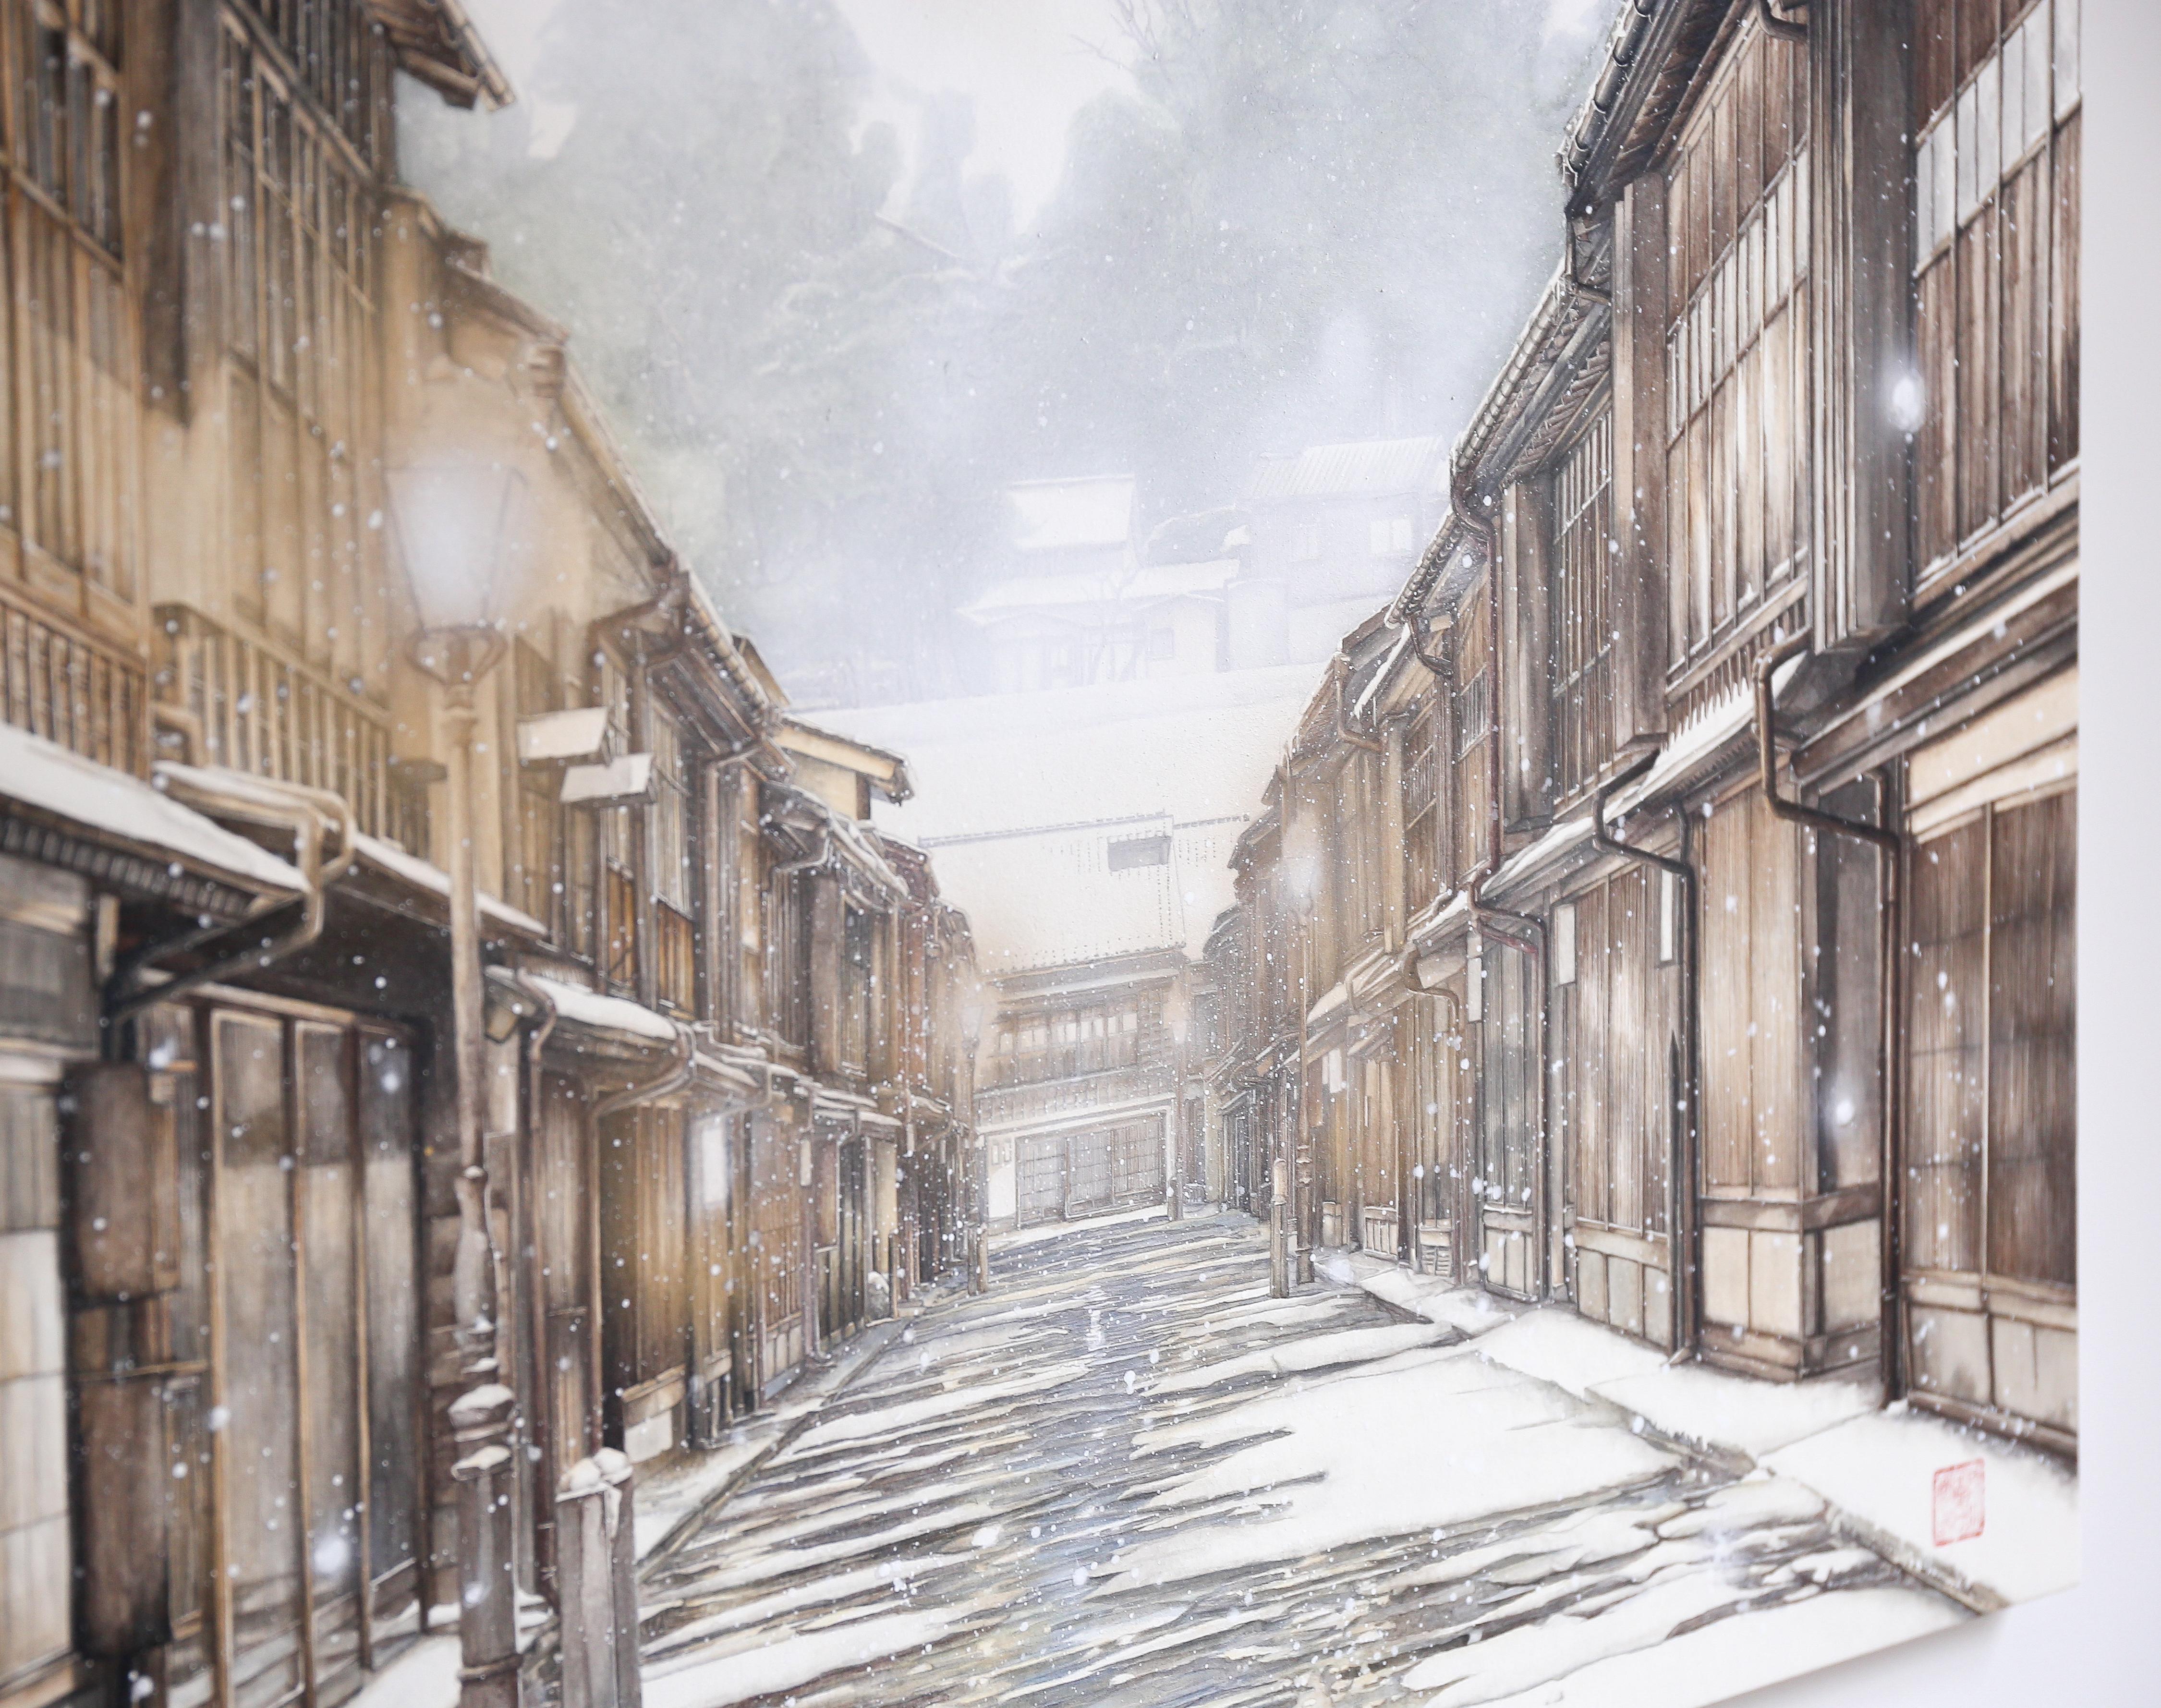 Kanazawa - Japanese Cityscape Painting in 24k Gold and Minerals, Realism, Winter For Sale 5